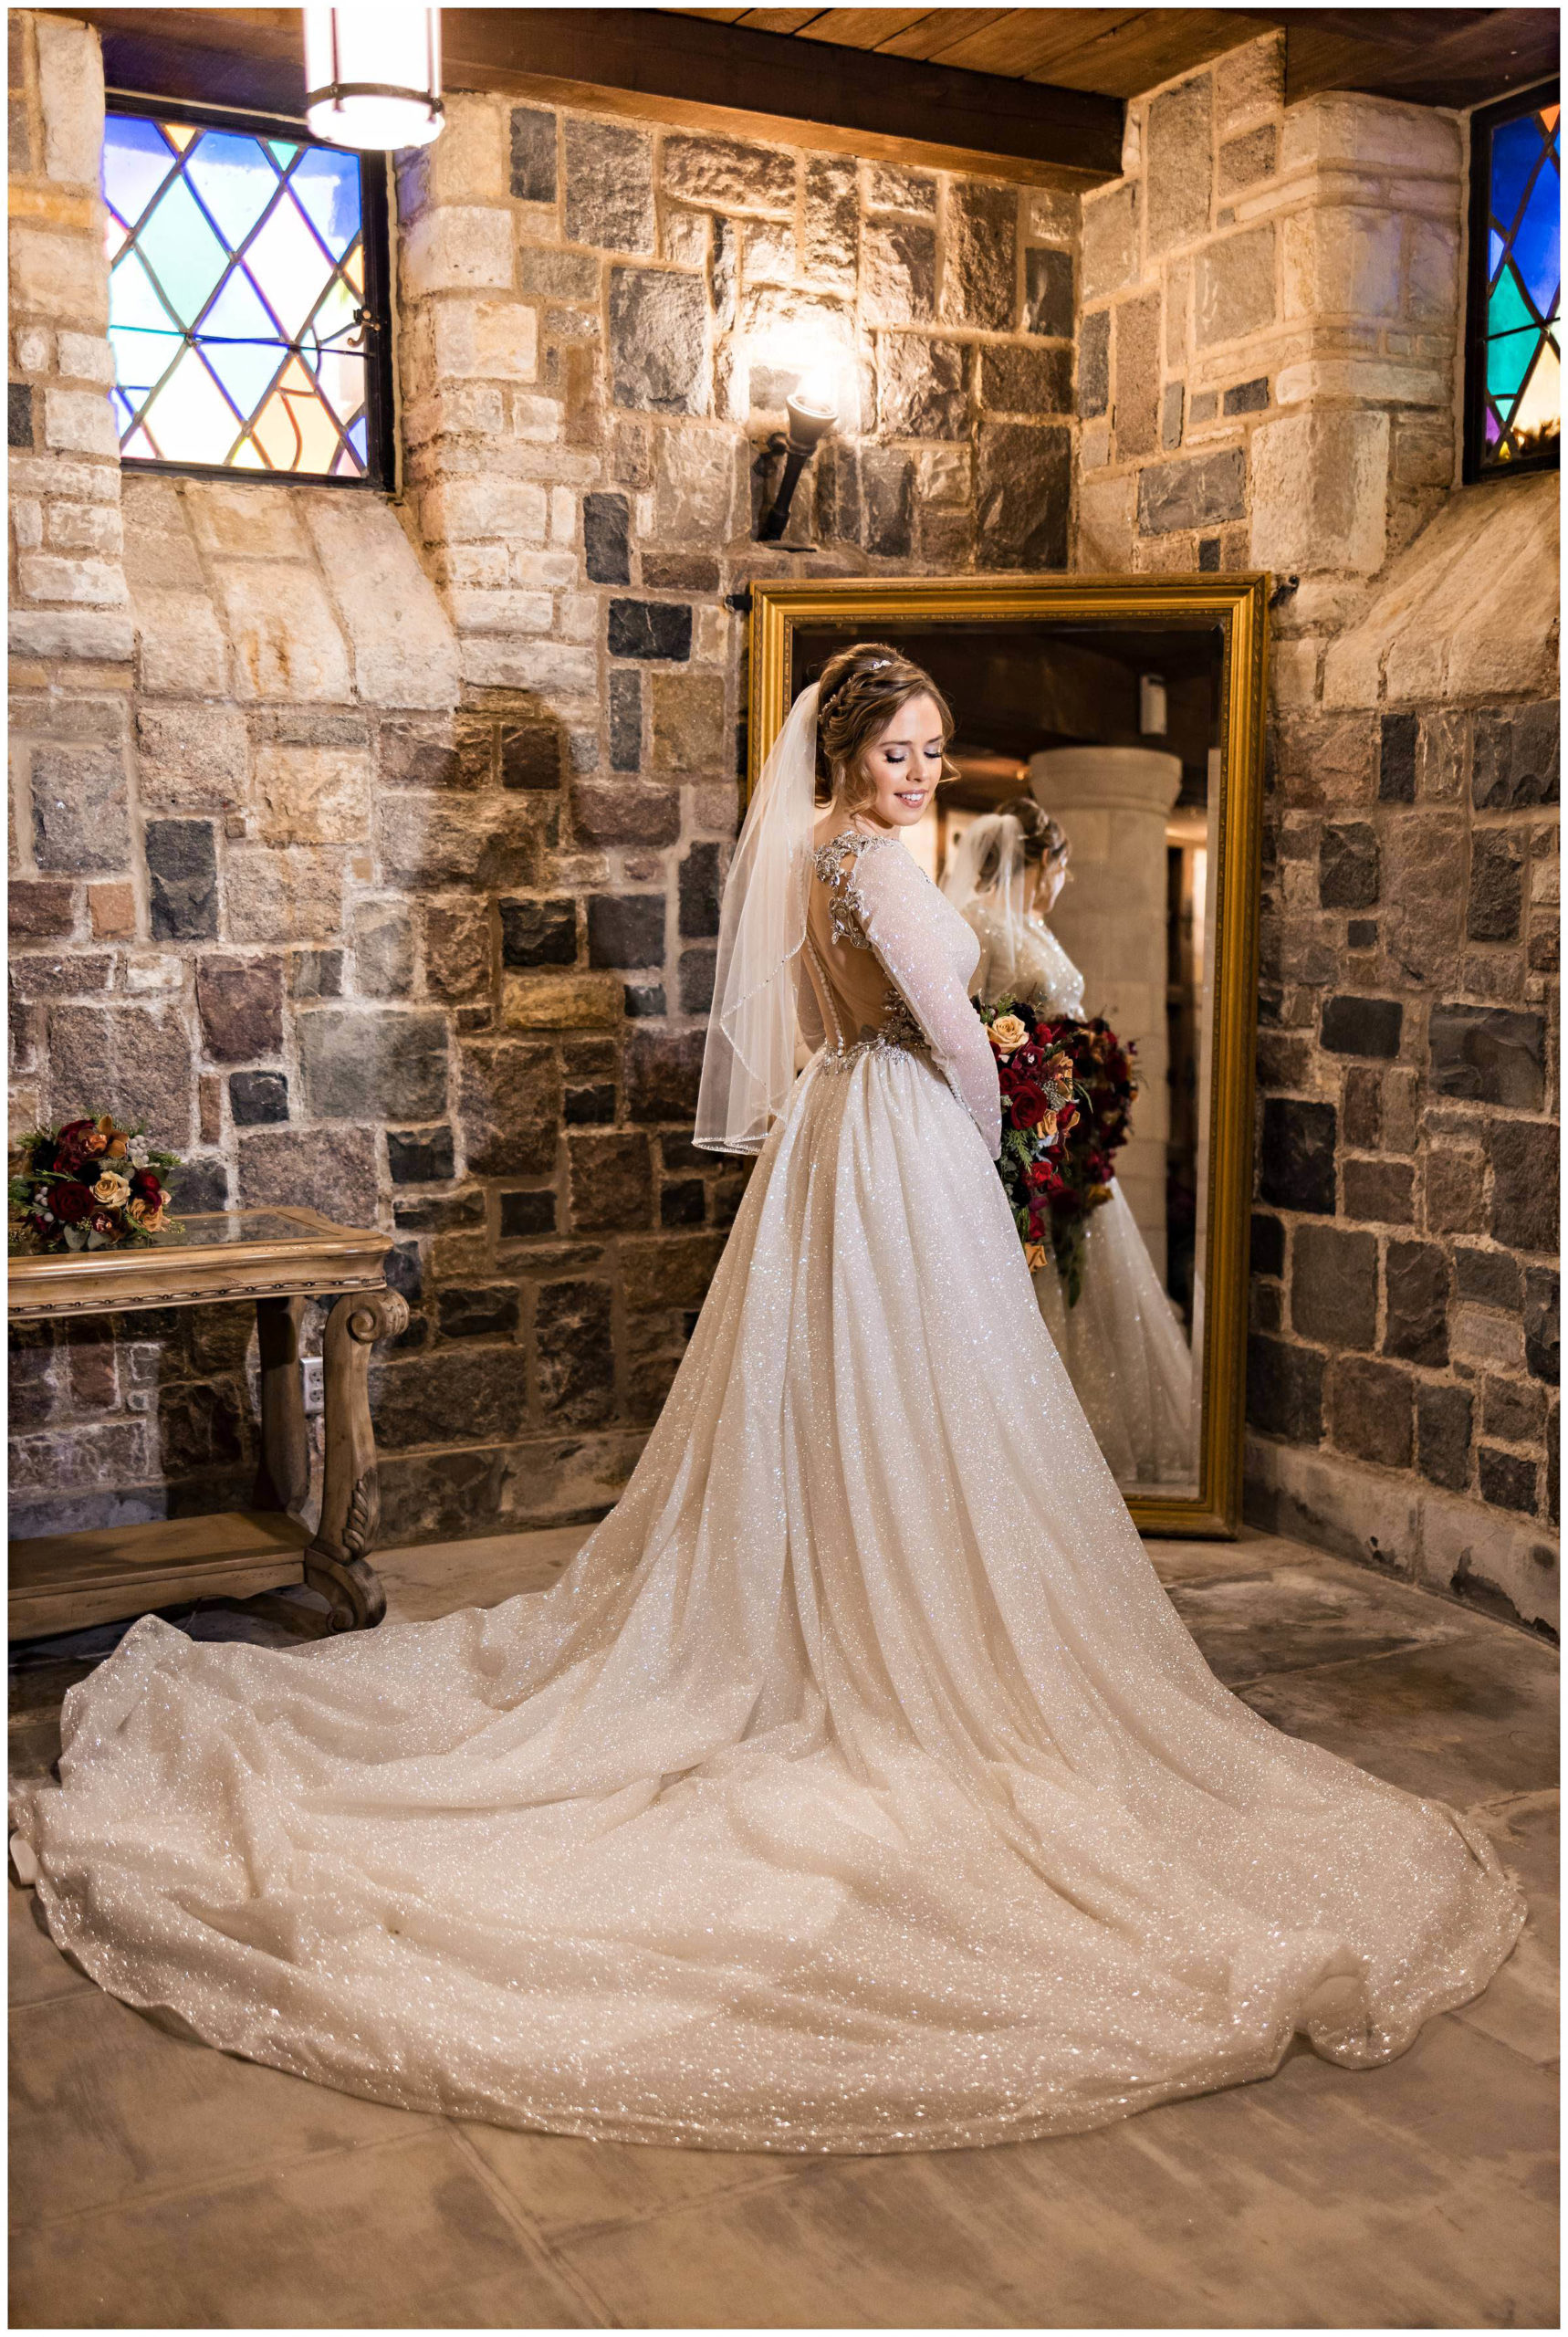 Full shot of bride's wedding dress with the bride looking down and smiling, holding bouquet with mirror behind her by Detroit Wedding Photographer Michele Maloney